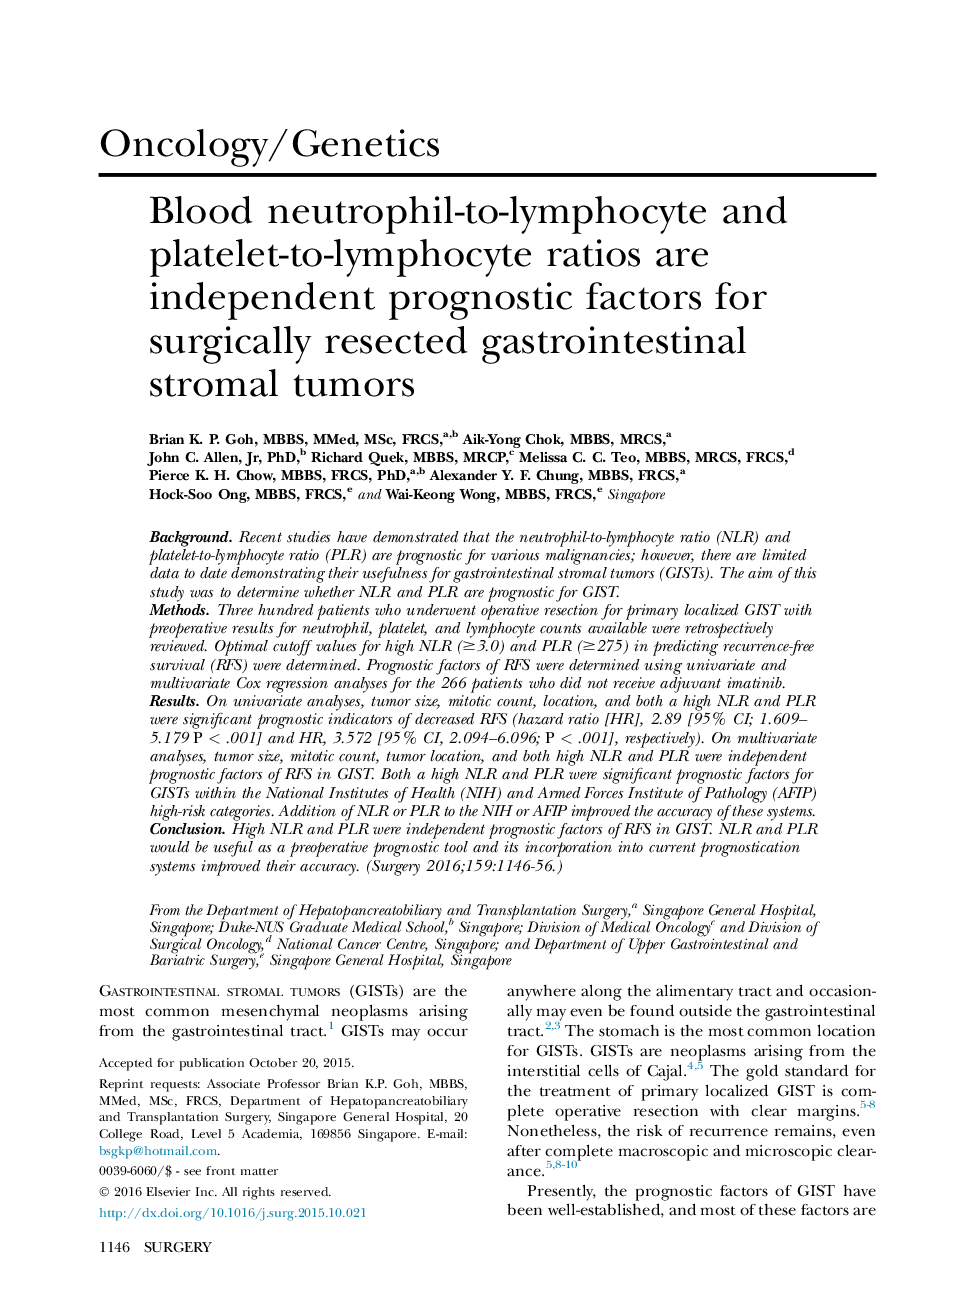 Blood neutrophil-to-lymphocyte and platelet-to-lymphocyte ratios are independent prognostic factors for surgically resected gastrointestinal stromal tumors